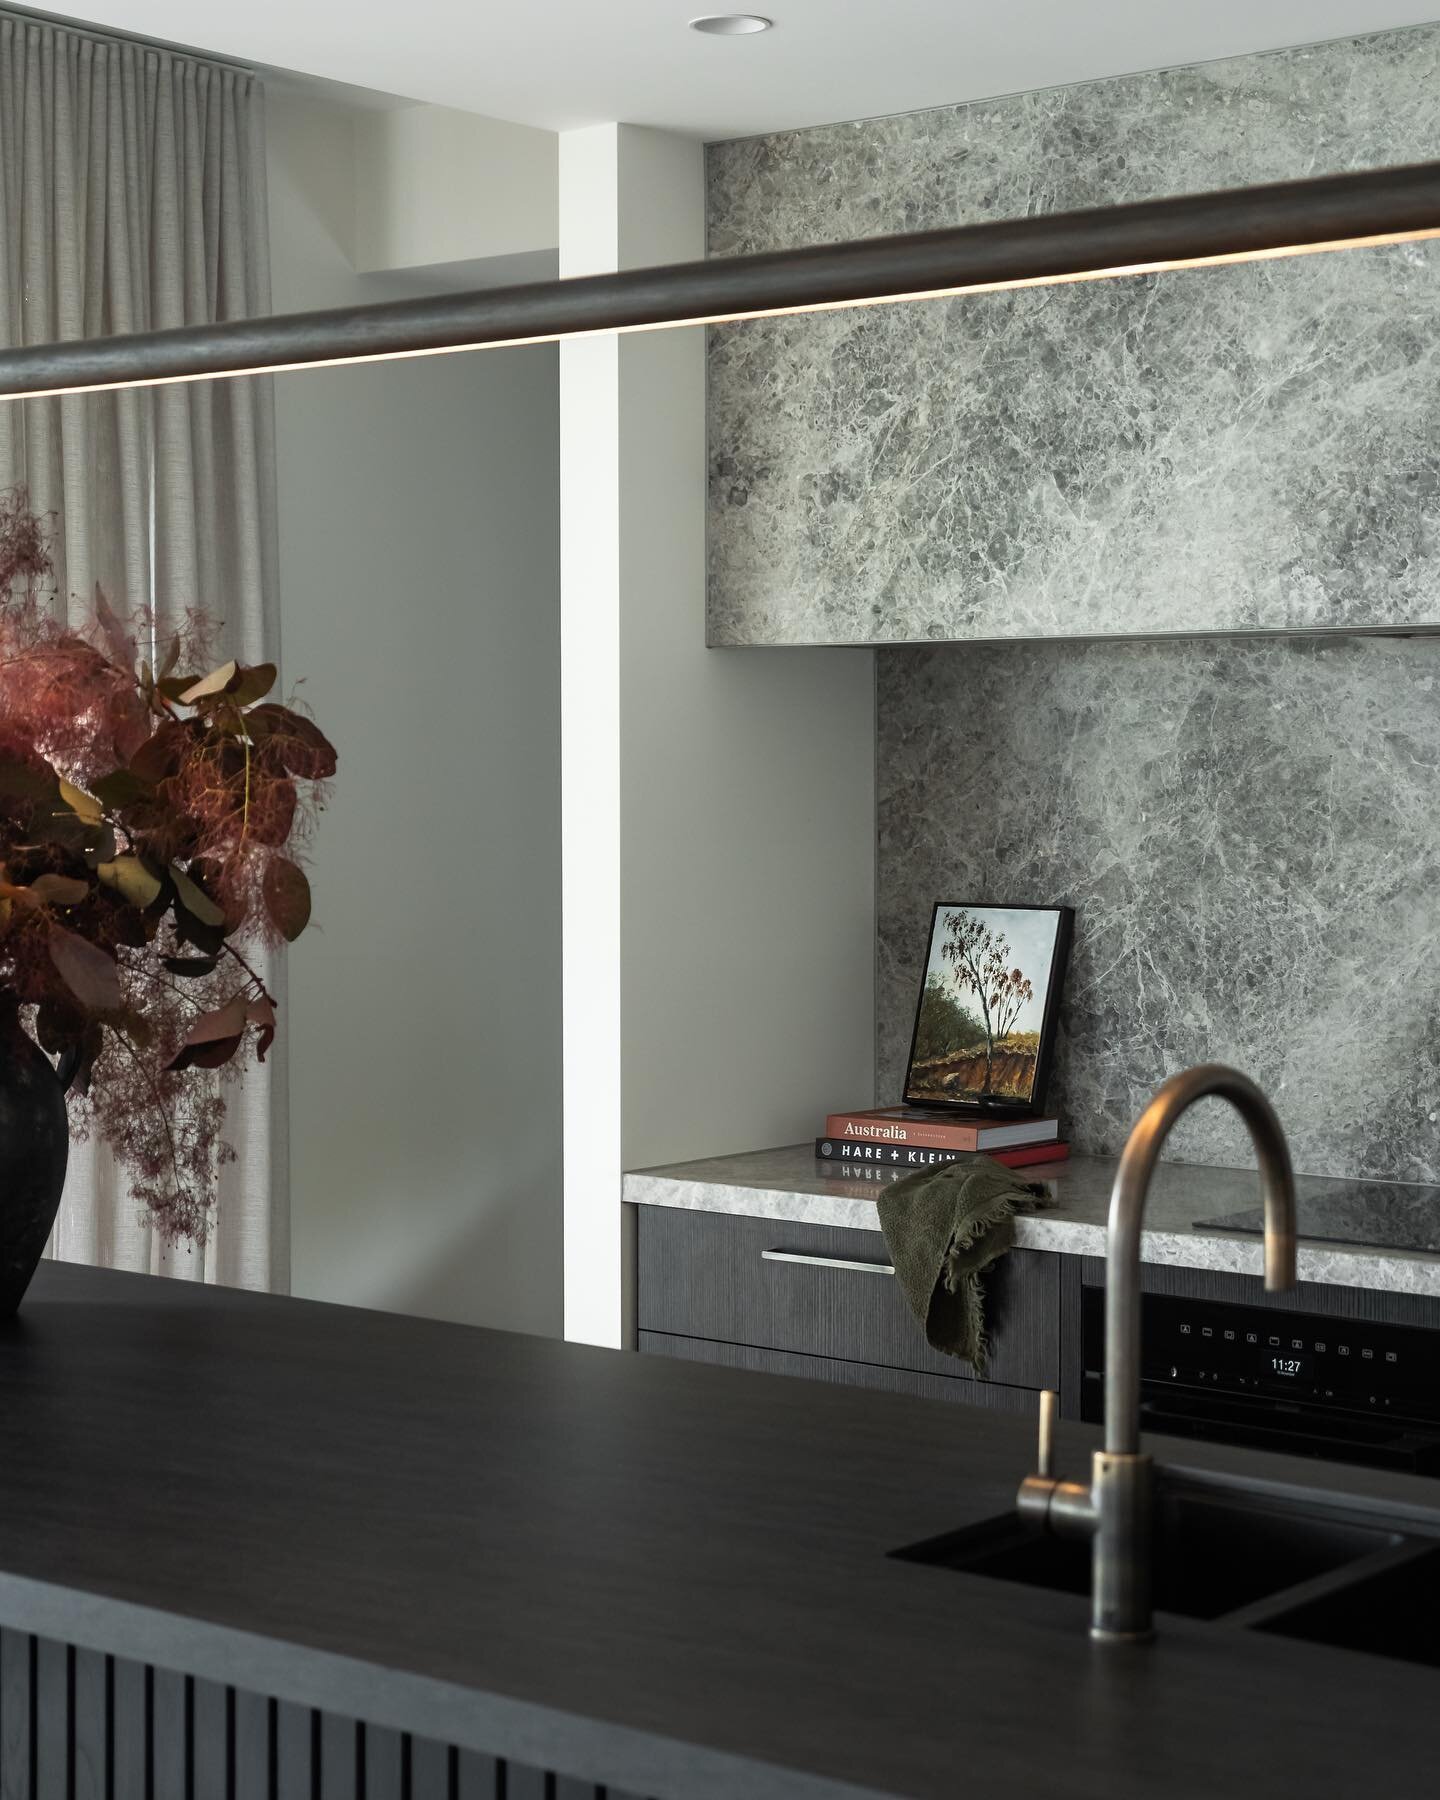 The kitchen is the starting point, setting the tone for the style and mood of the home.

We struck a balance of practicality, colour and finish. Natural limestone was selected  for the luxurious backdrop, and a durable Neolith sintered stone for the 